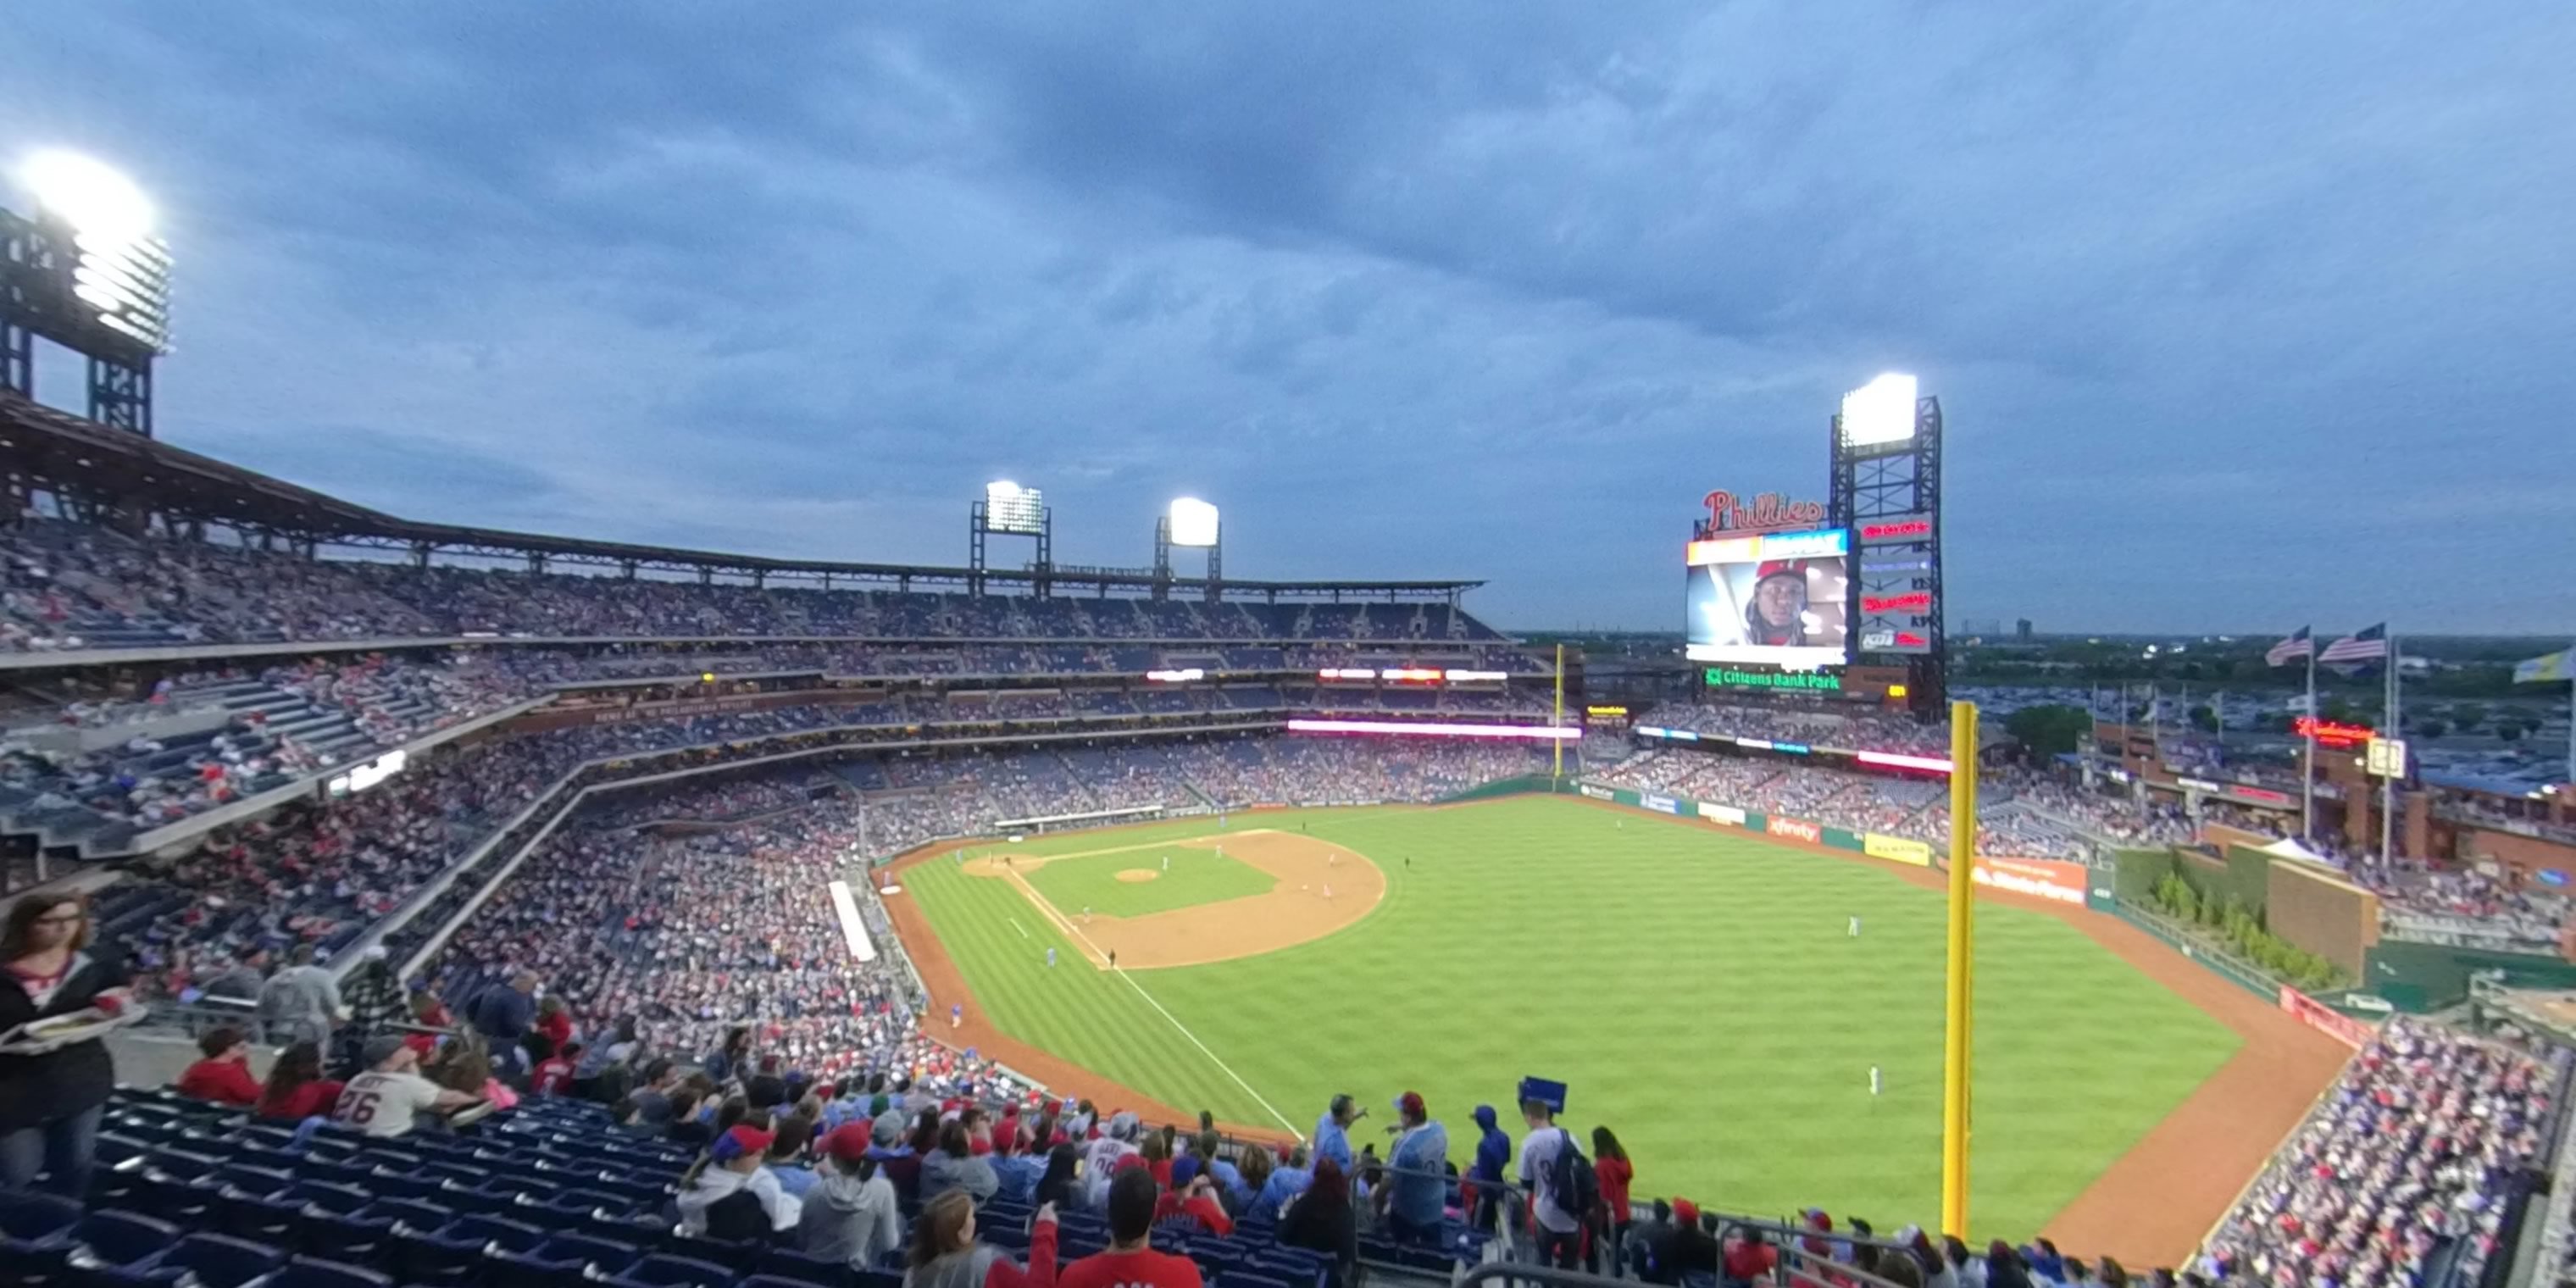 section 307 panoramic seat view  for baseball - citizens bank park